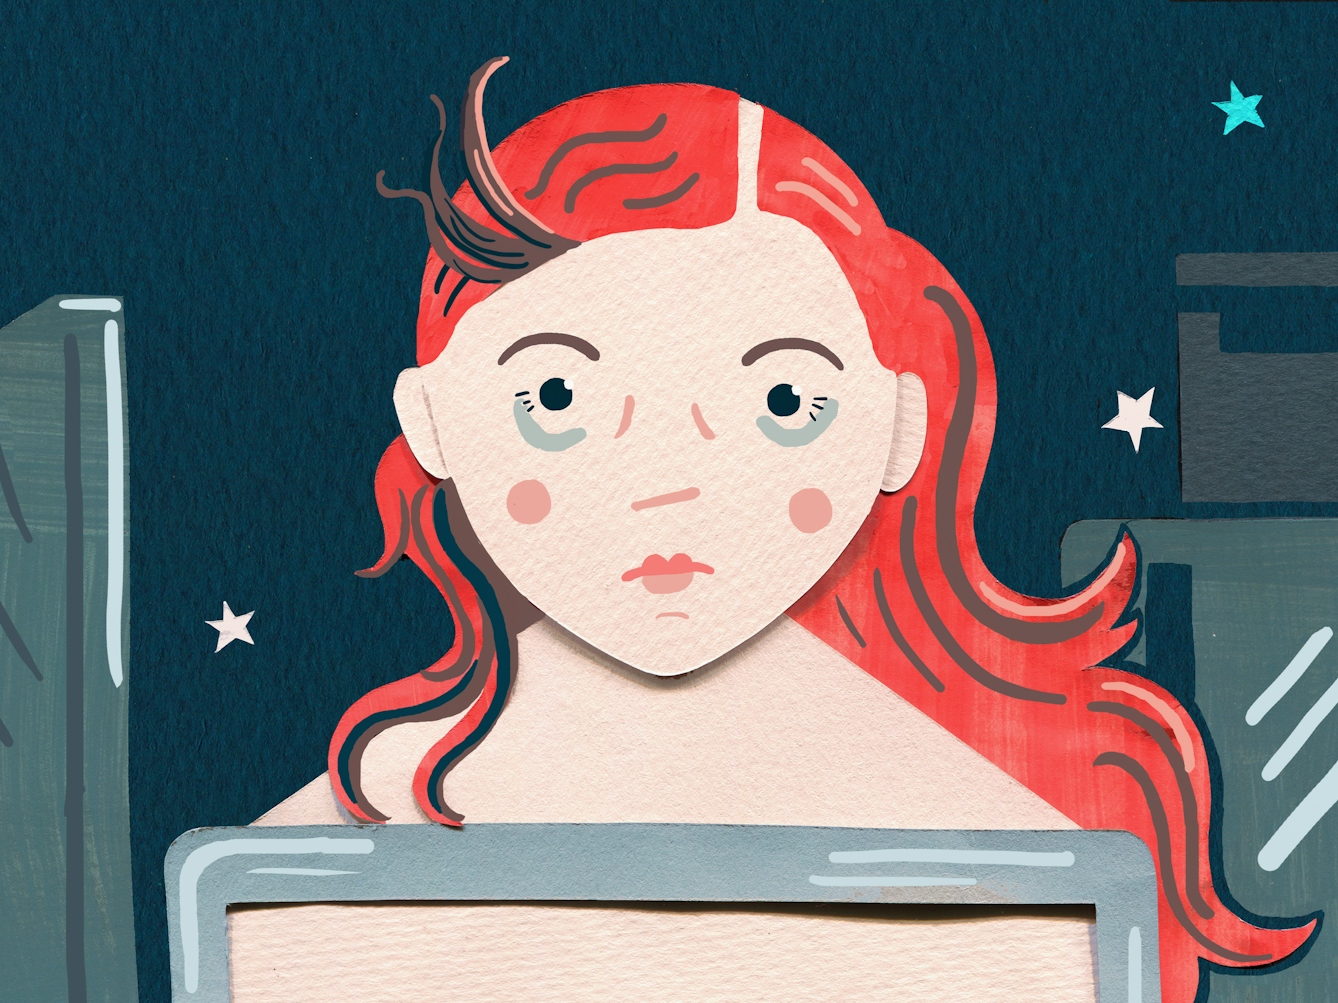 A mixed media illustration depicting a mother. Her bright red hair is dishevelled and she has bags under her eyes. In the background we see stars, depicting that it is nighttime.